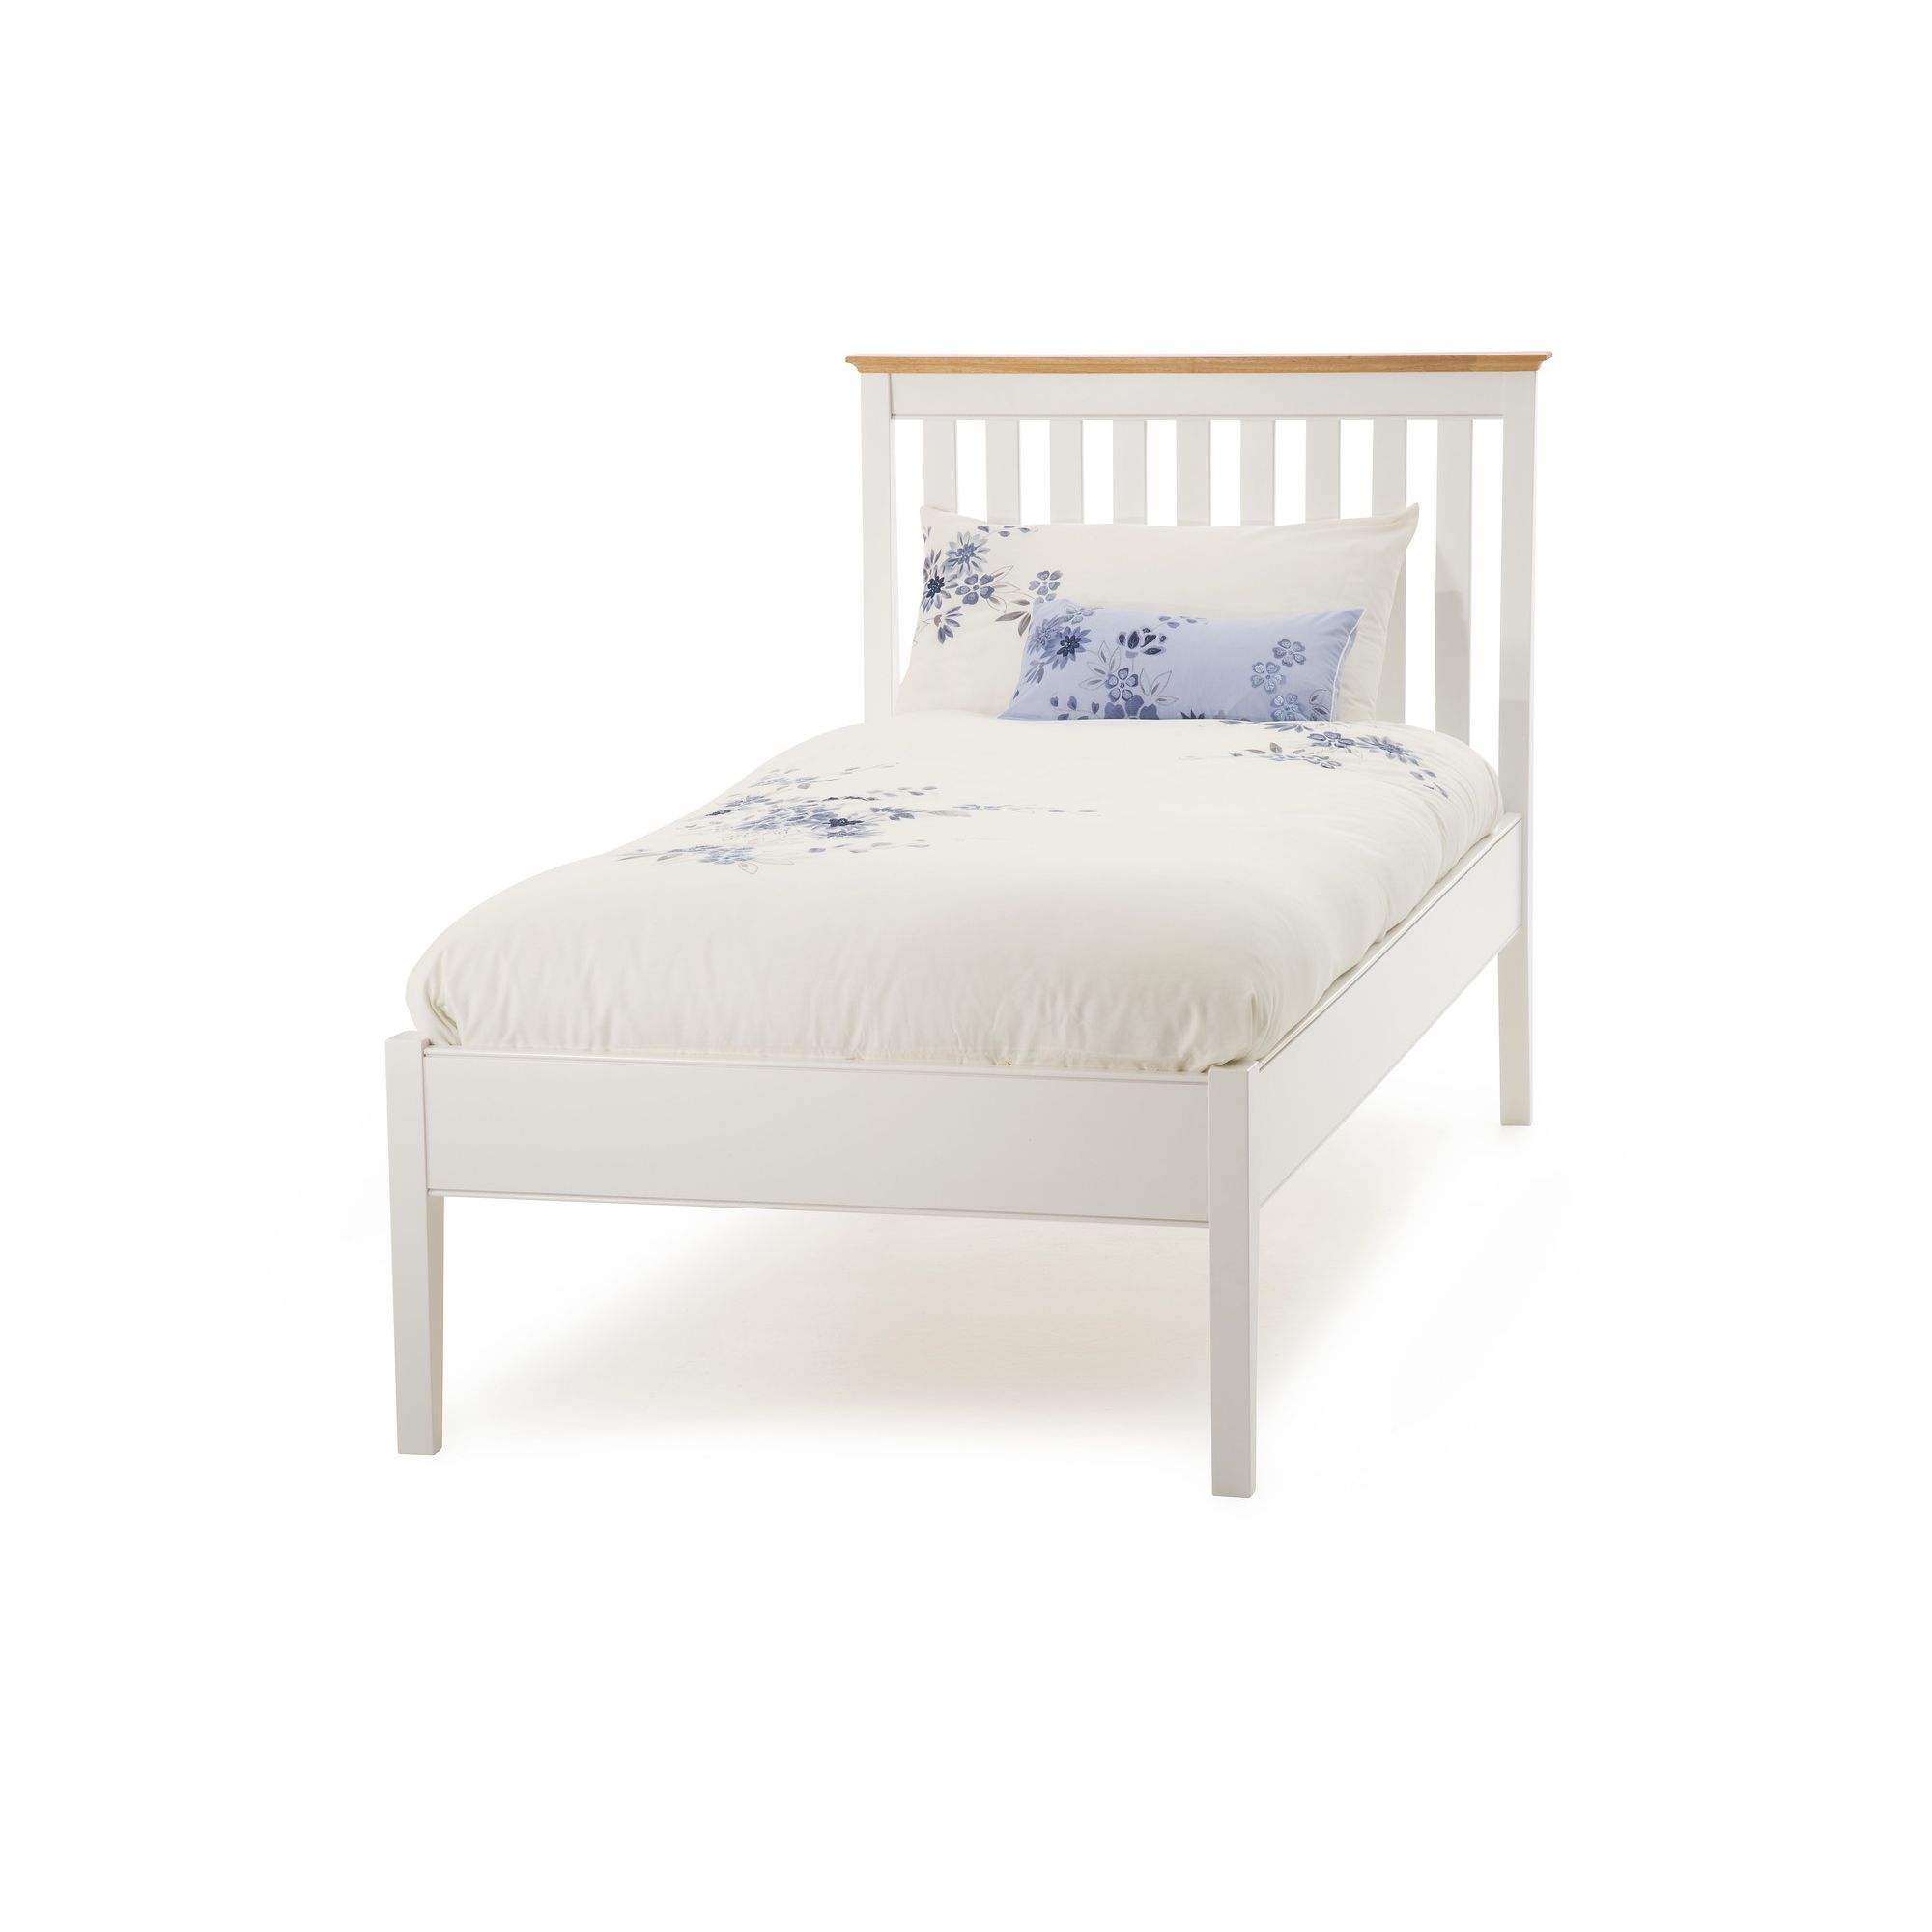 Serene Furnishings Grace Single Guest Bed with Low Foot End - Golden Cherry with Opal White at Tesco Direct